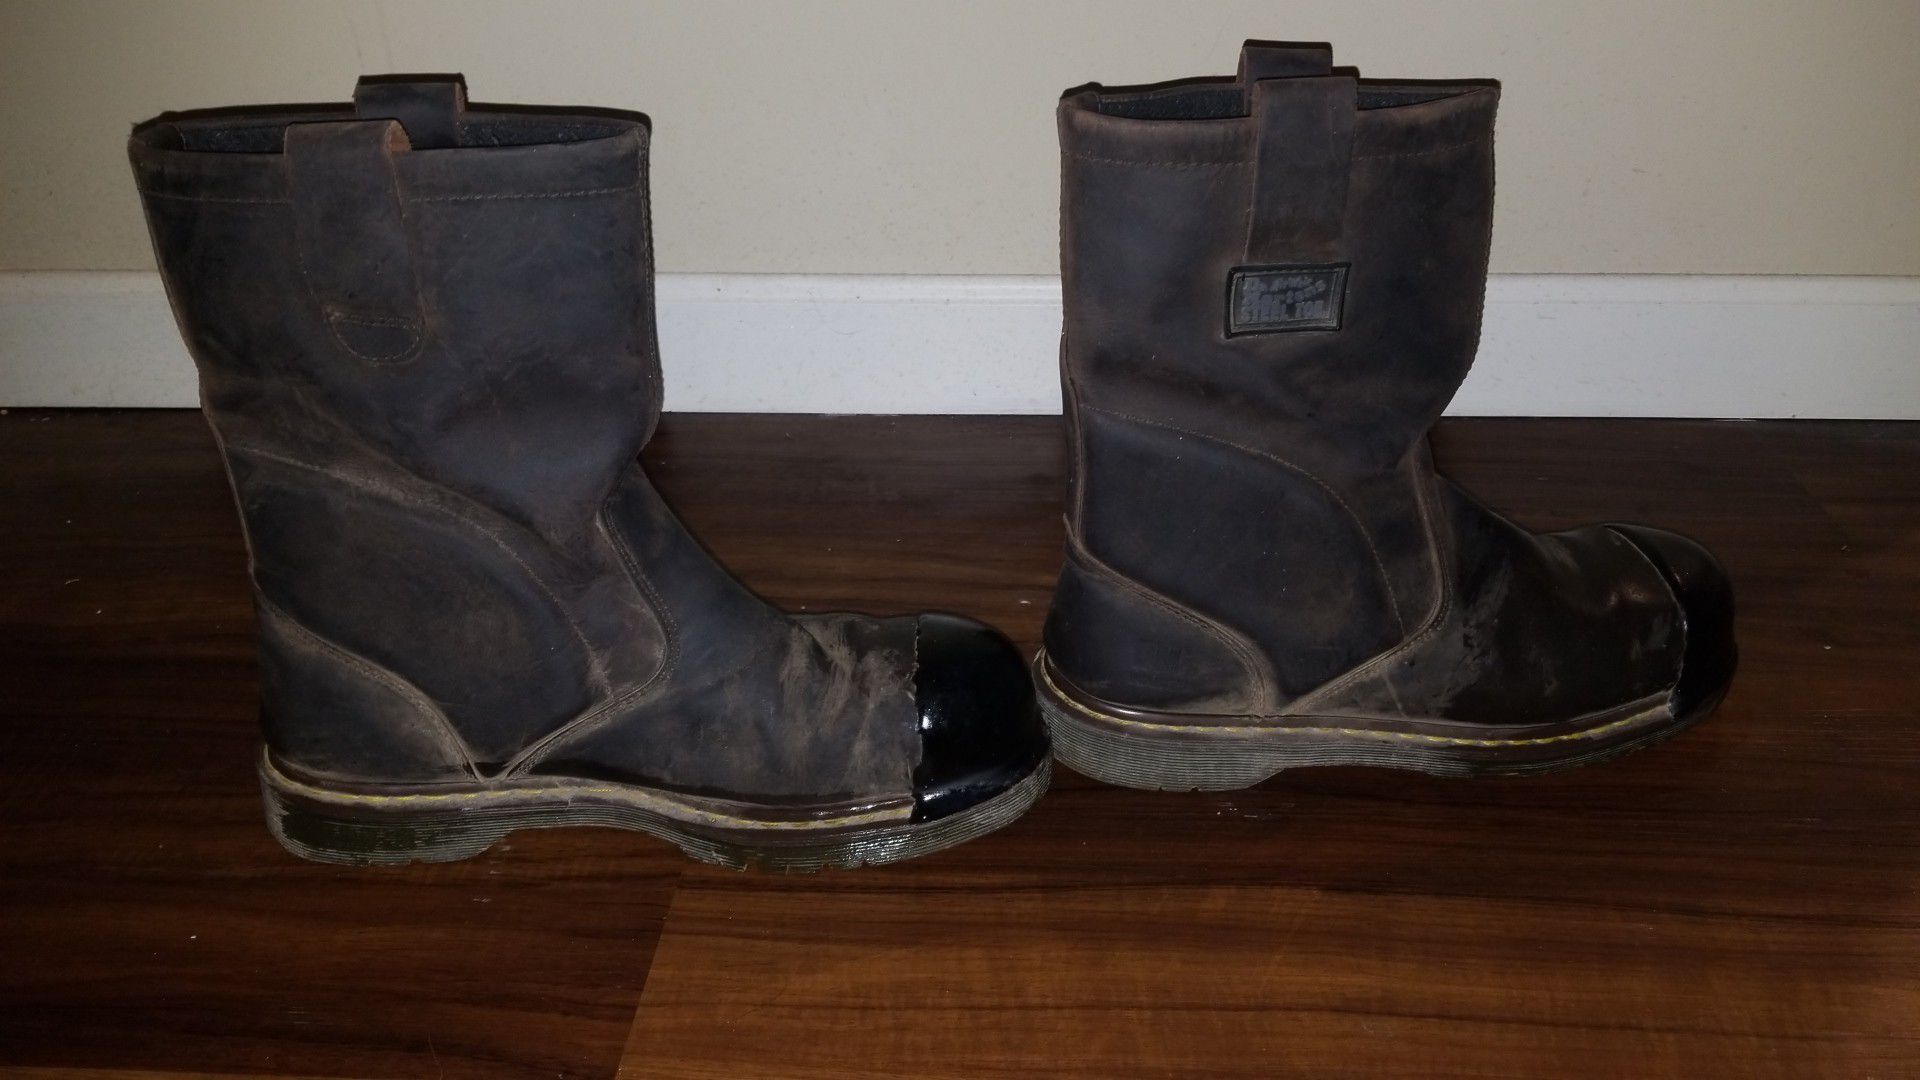 Doc marten safety work chore boots size 12 hunting fishing farming